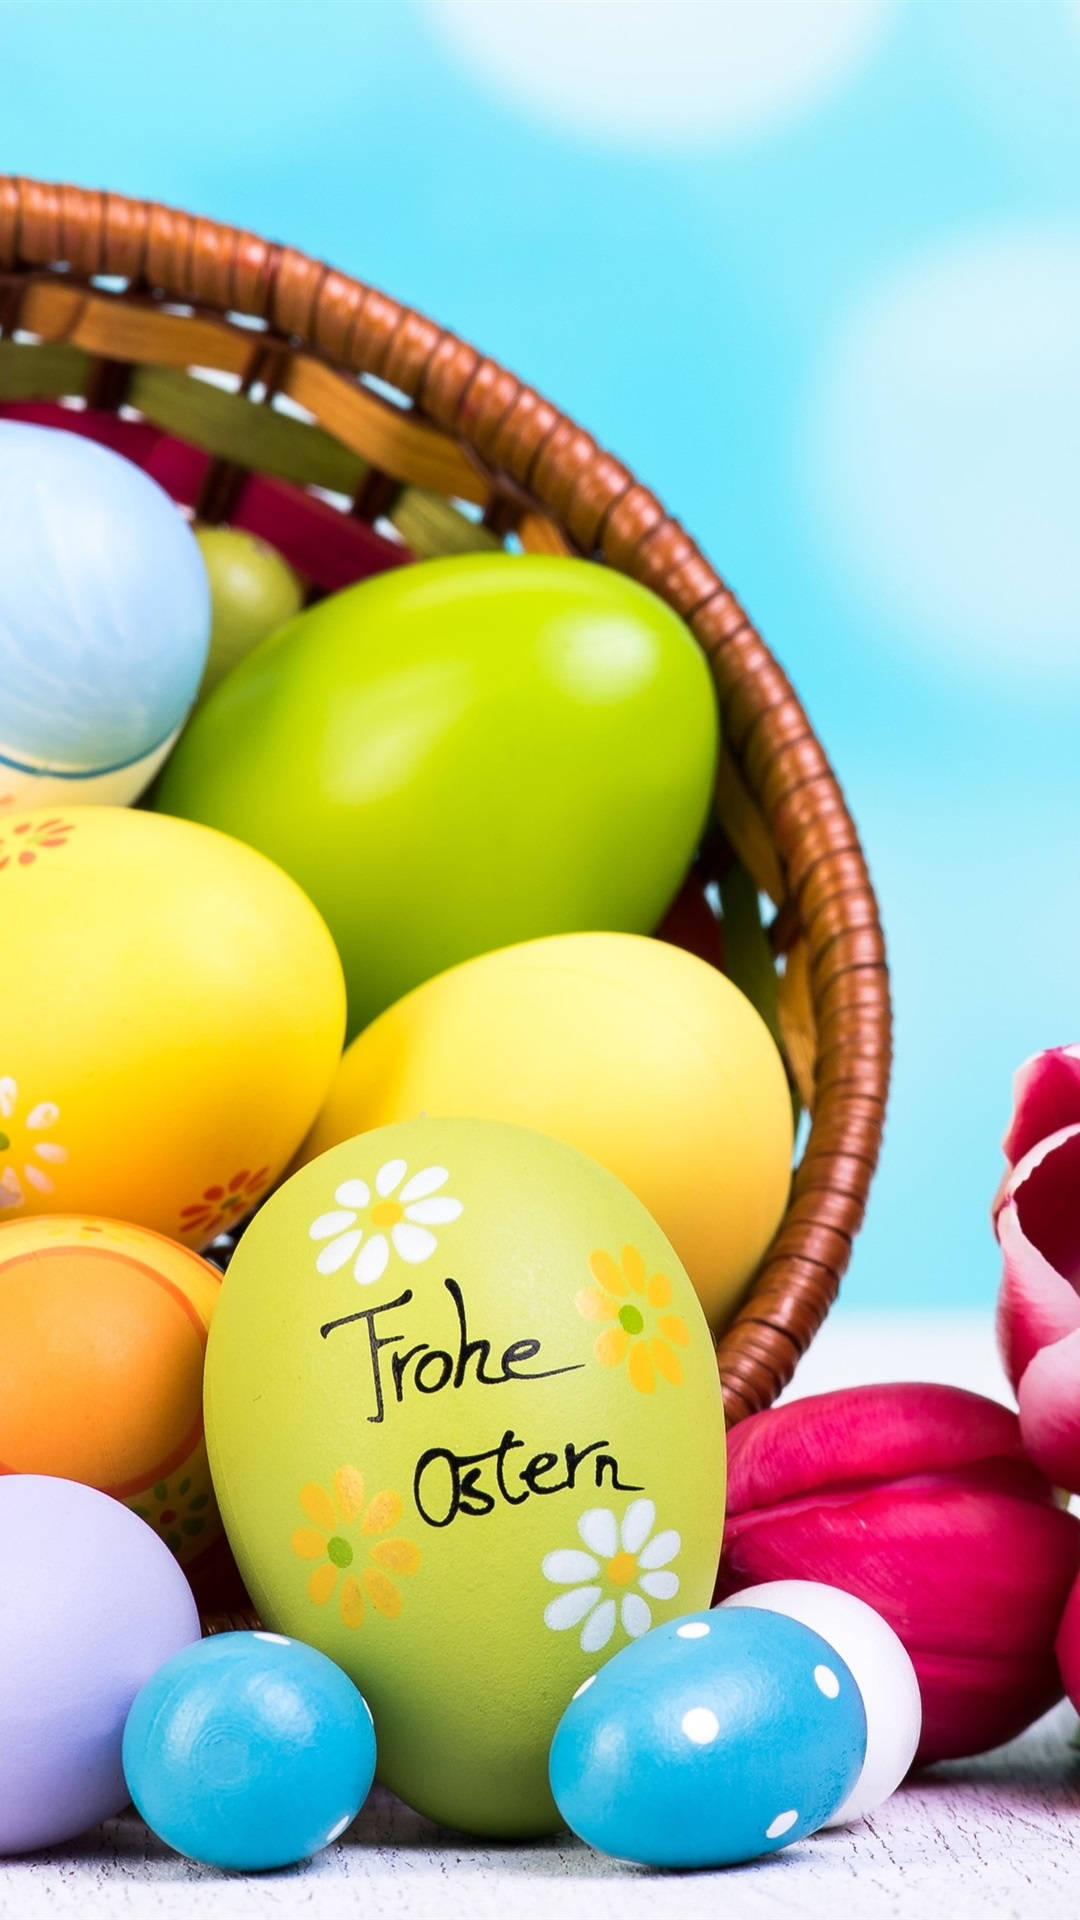 A Merry Easter With A Sparkle Of Joy Background